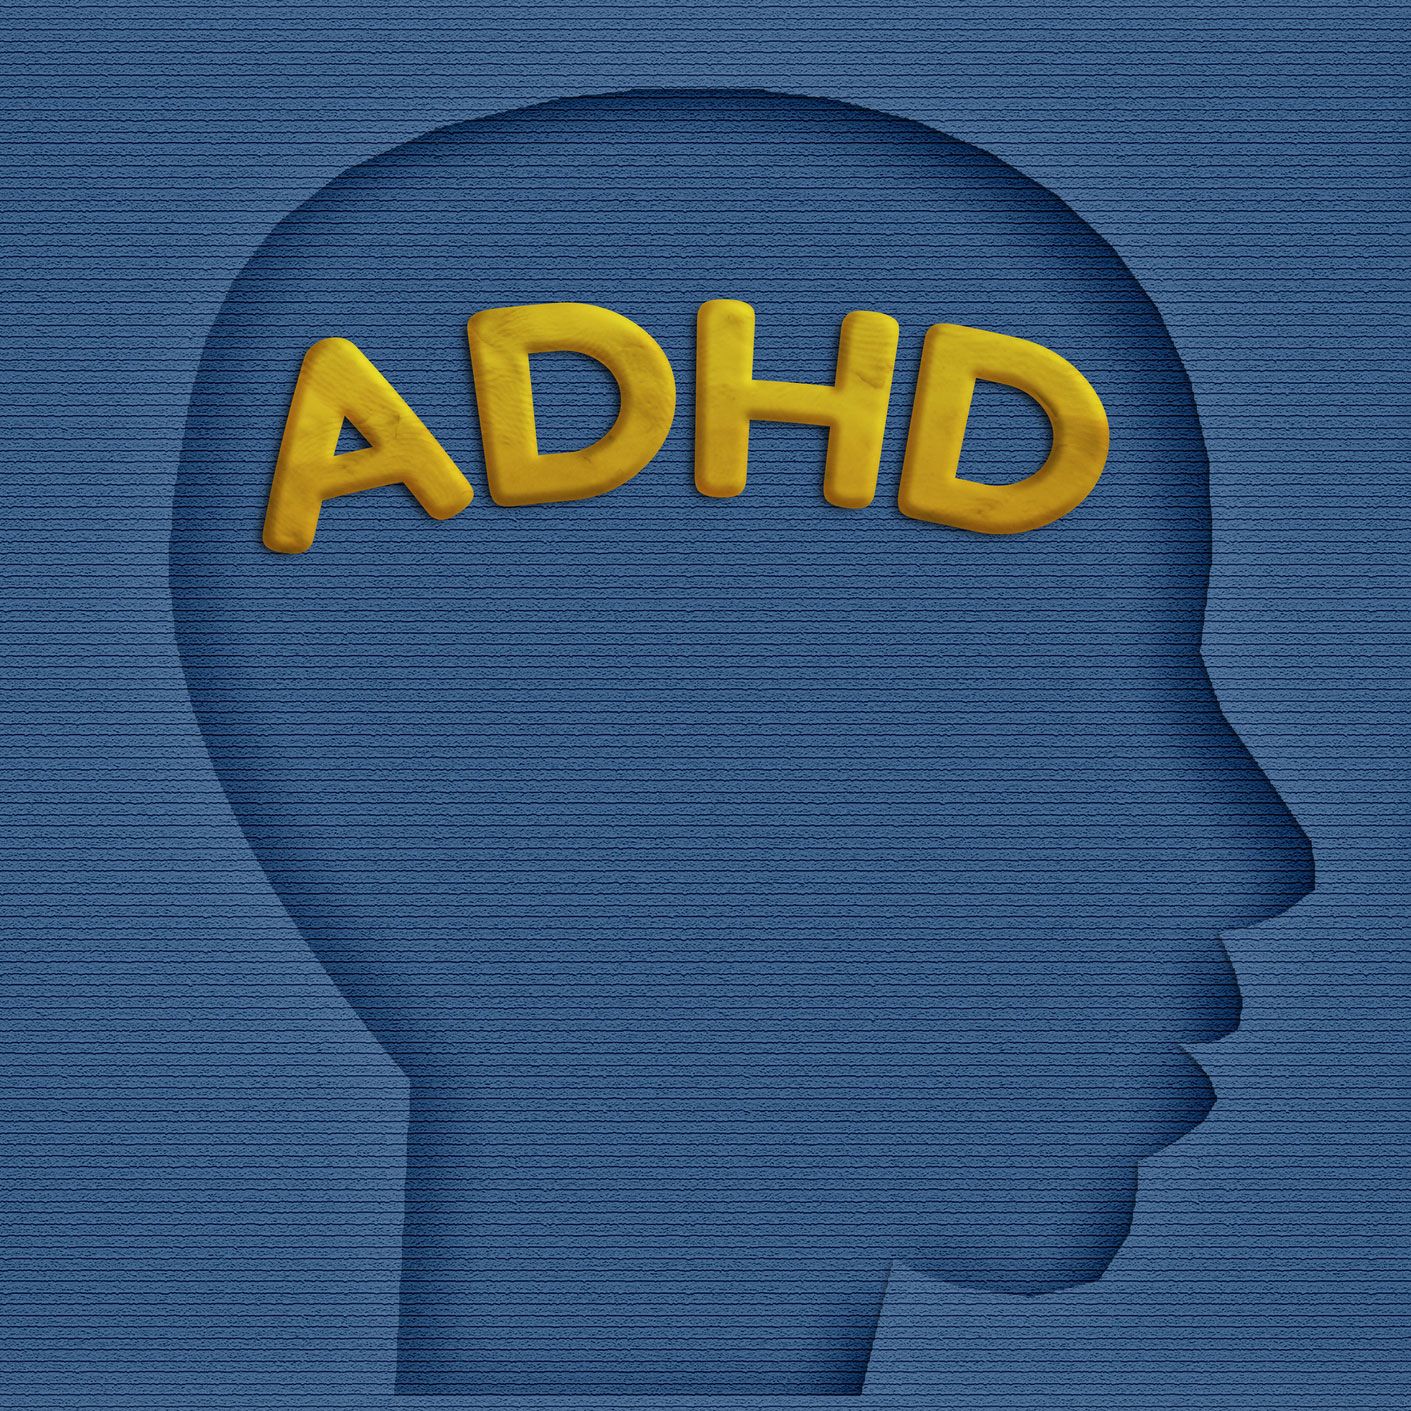 Illustrated ADHD | Anchorage, AK | James D. Briggs MD